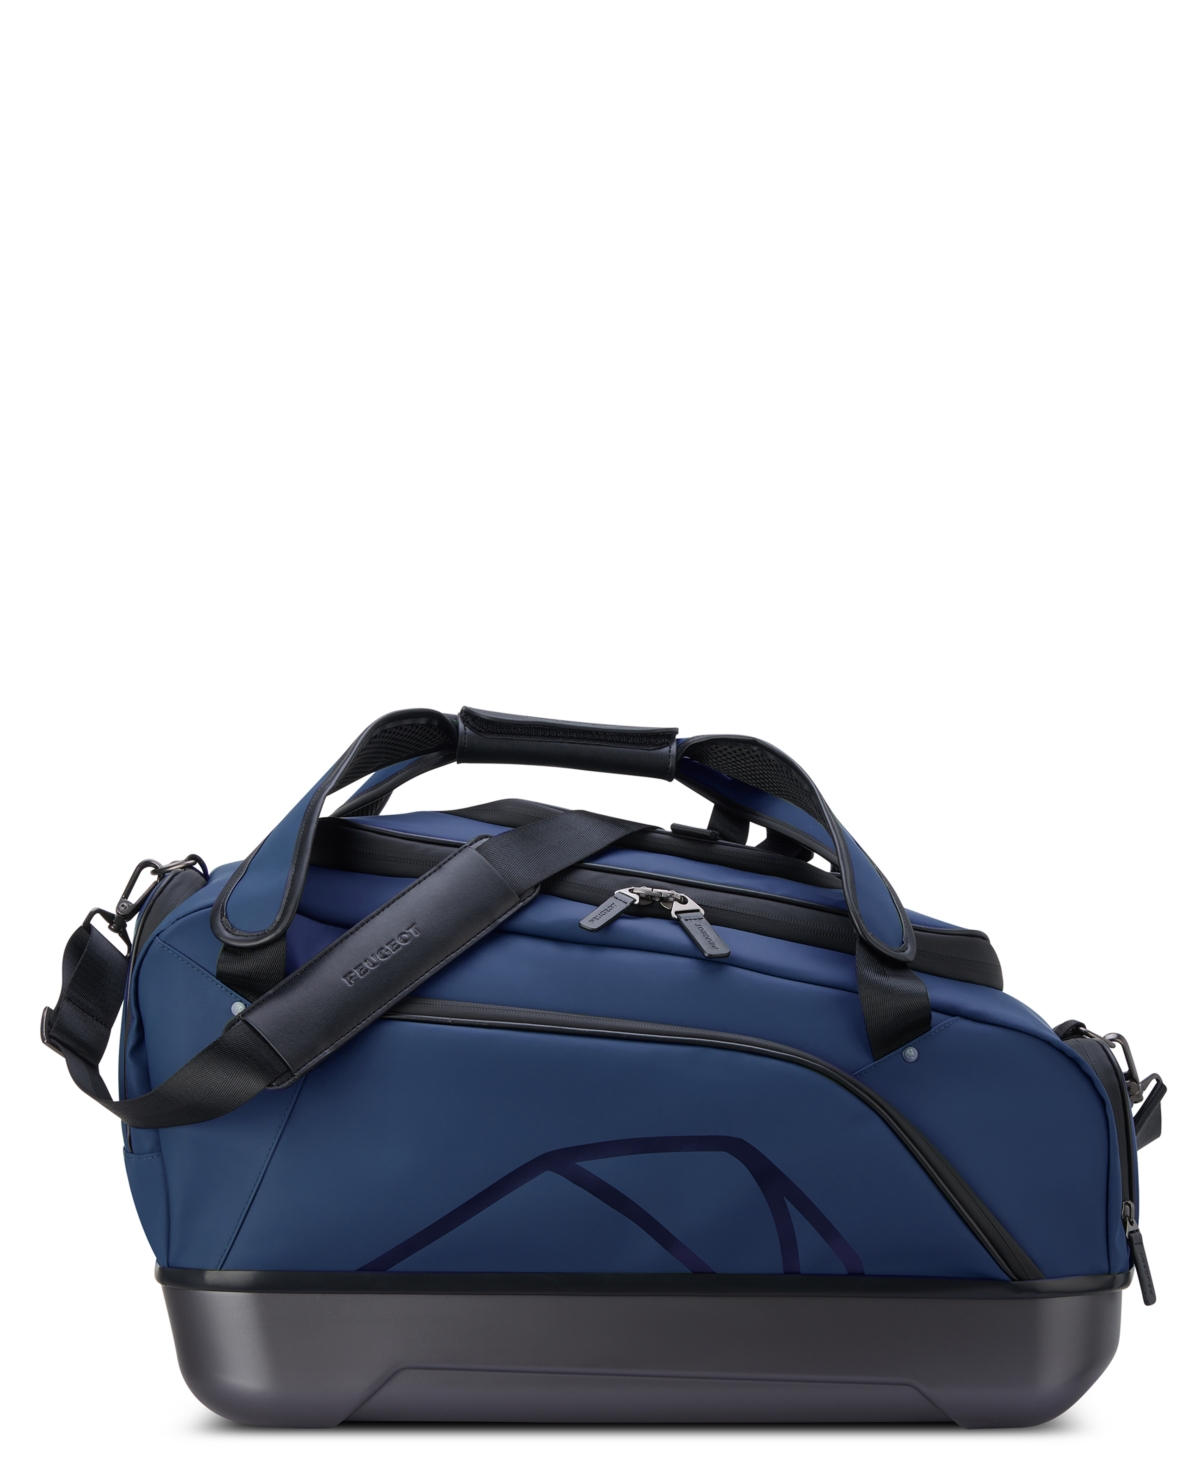 Voyages 21" Carry-On Duffle Bag - Navy